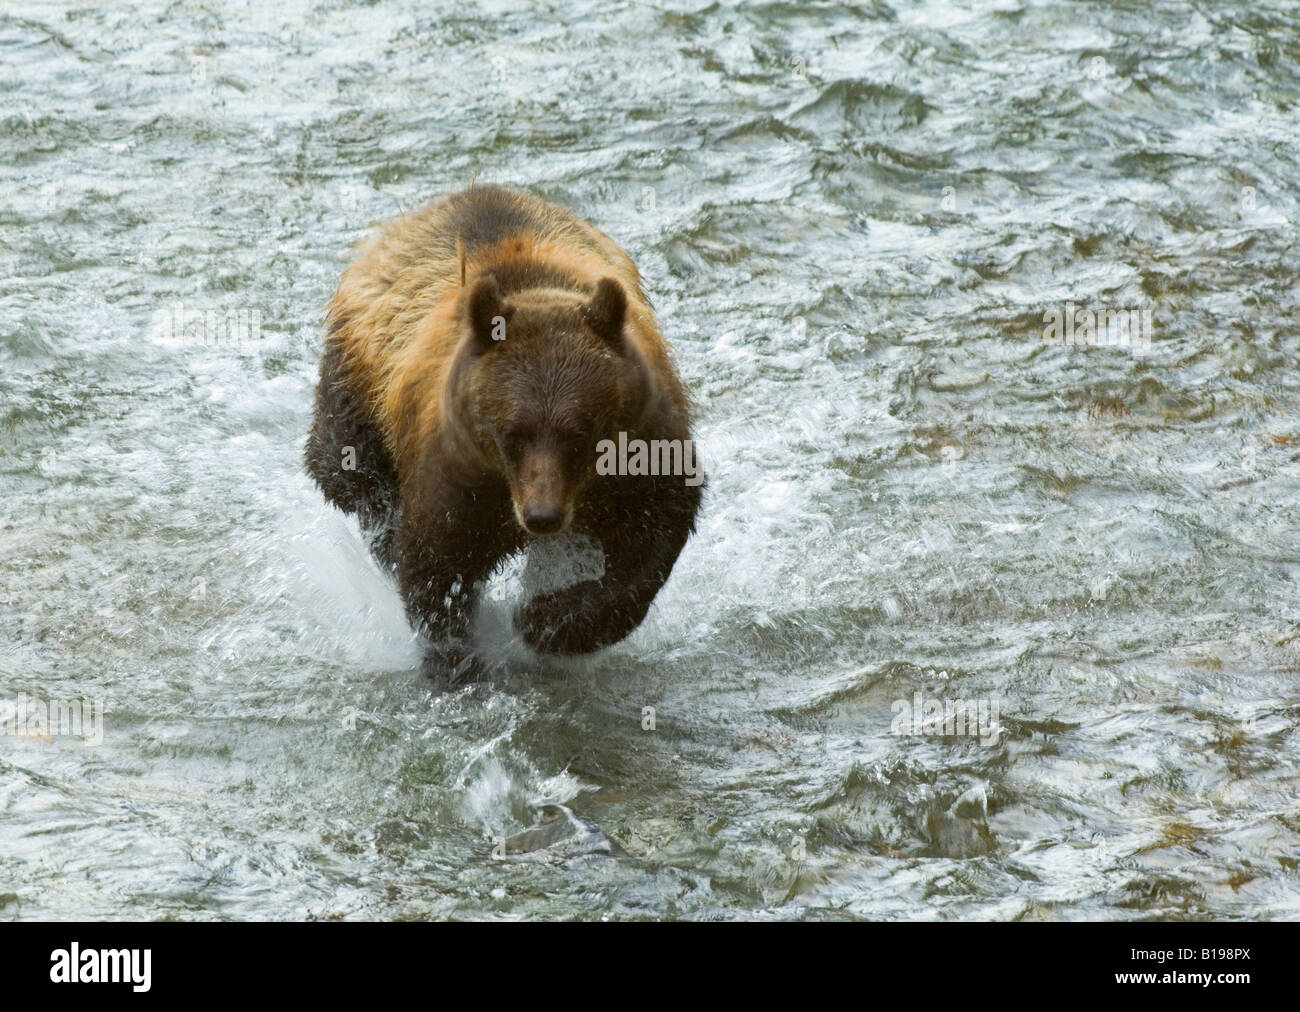 Grizzly Bear (Ursus arctos) Adult fishing in Fish Creek. Each Bear developes its own technique for fishing. This adult chooses t Stock Photo